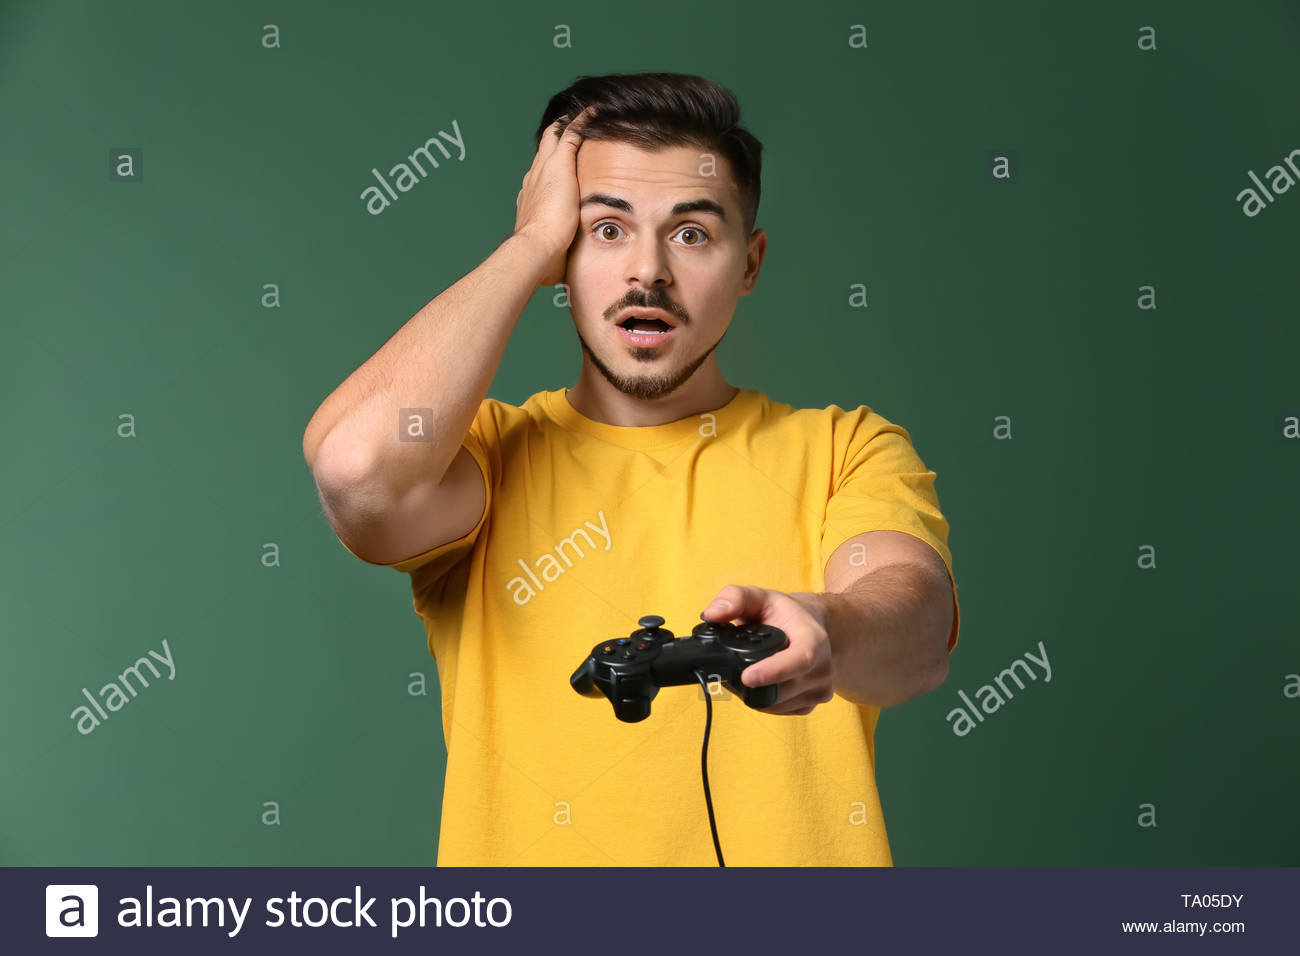 Young Man After Losing Video Game On Color Background Stock Photo